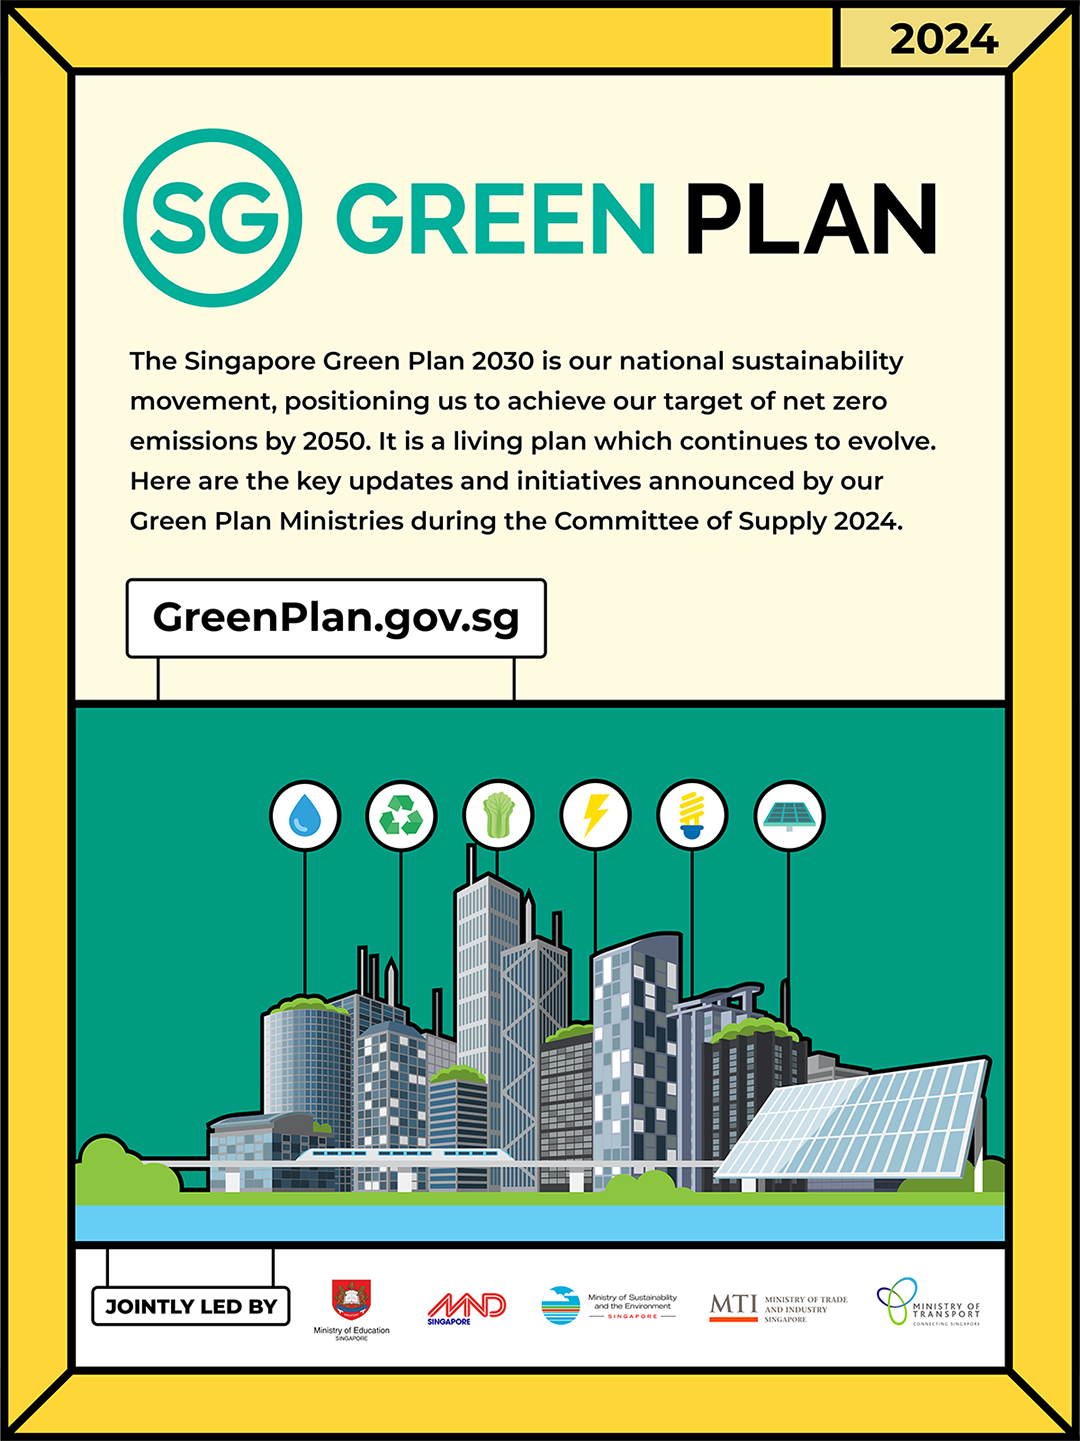 Singapore Green Plan 2024 Overview